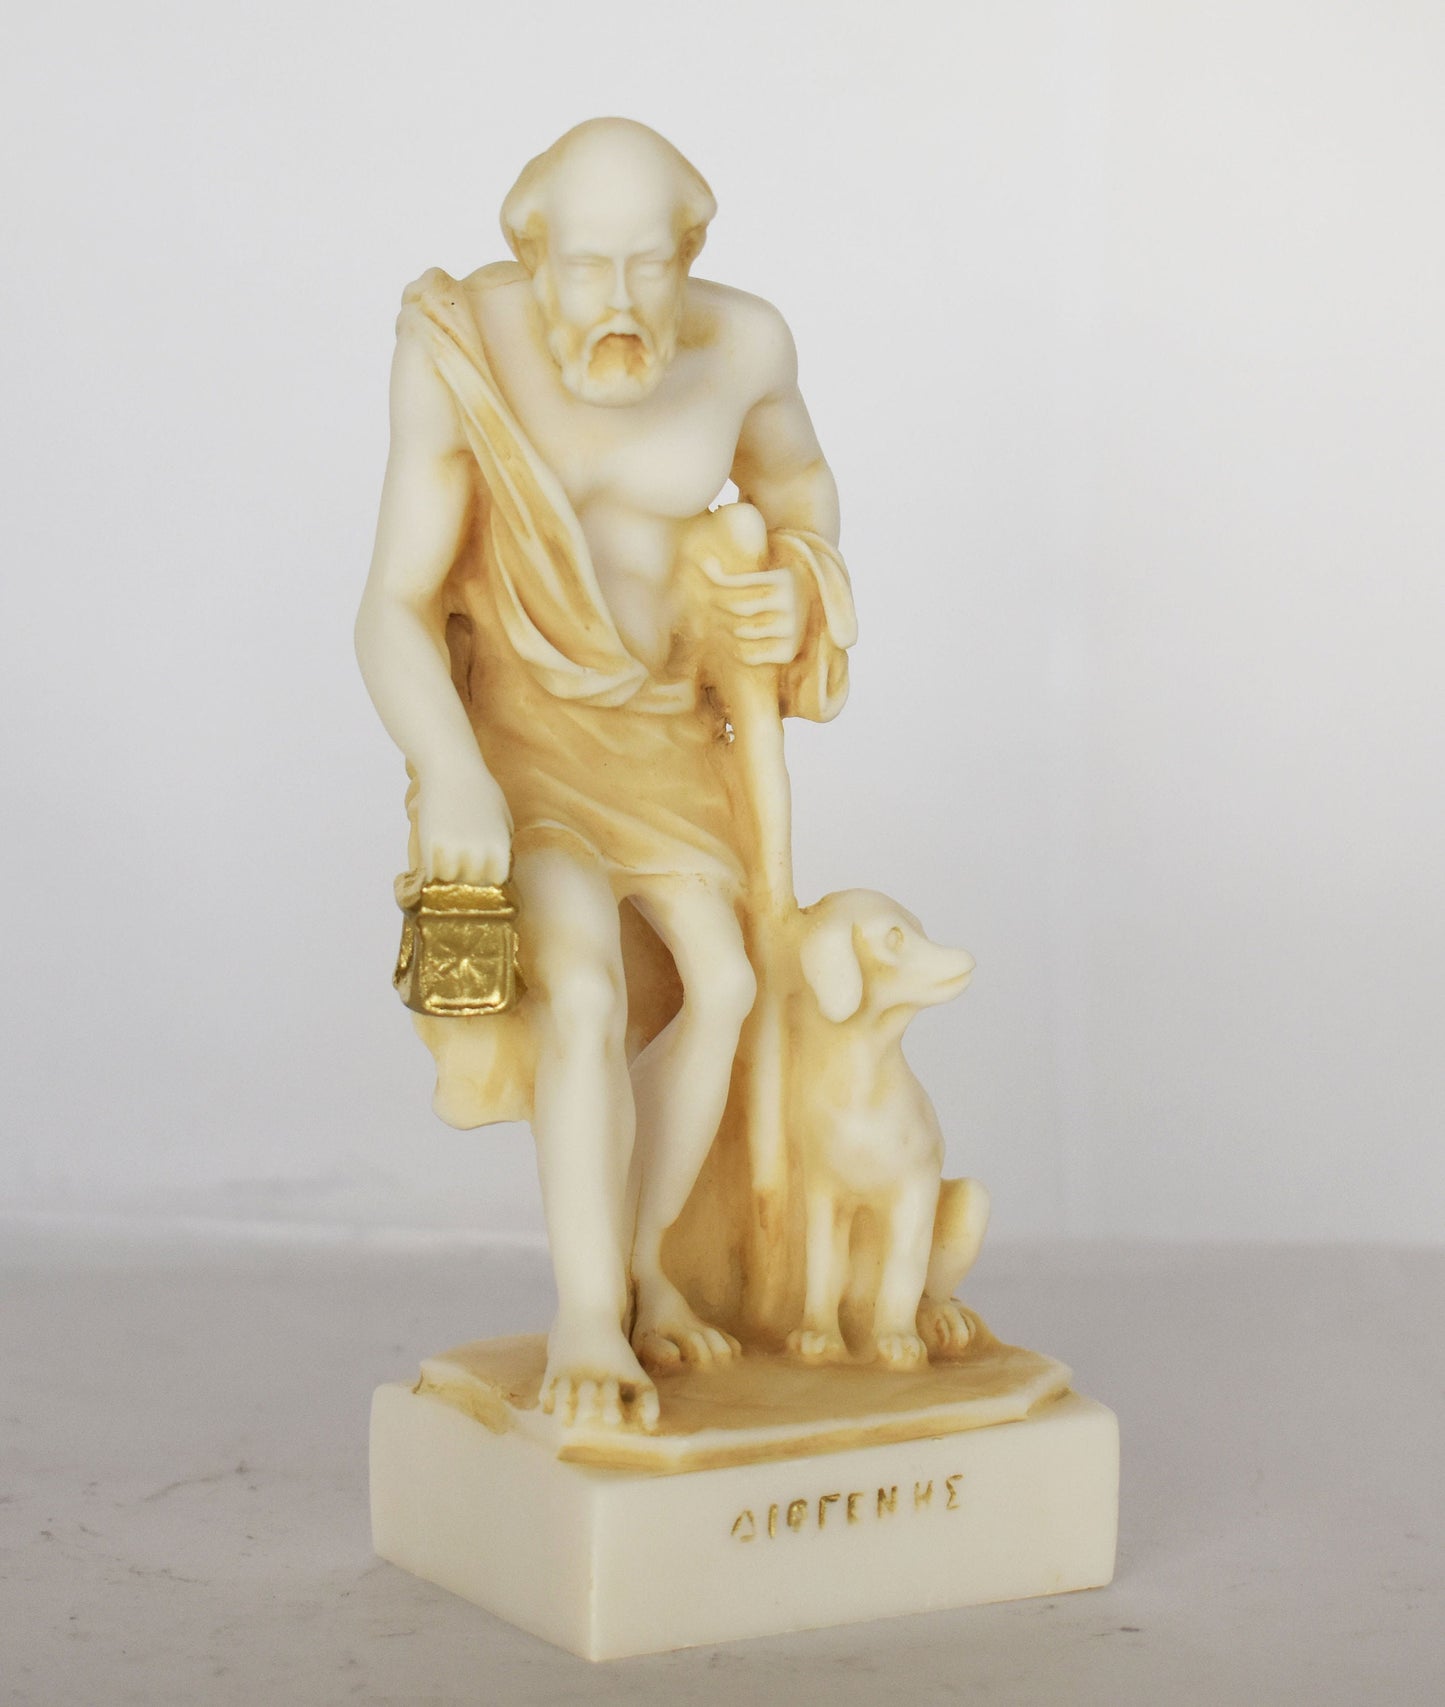 Diogenes the Cynic - Ancient Greek Philosopher - 412 -323 BC - Alabaster Statue